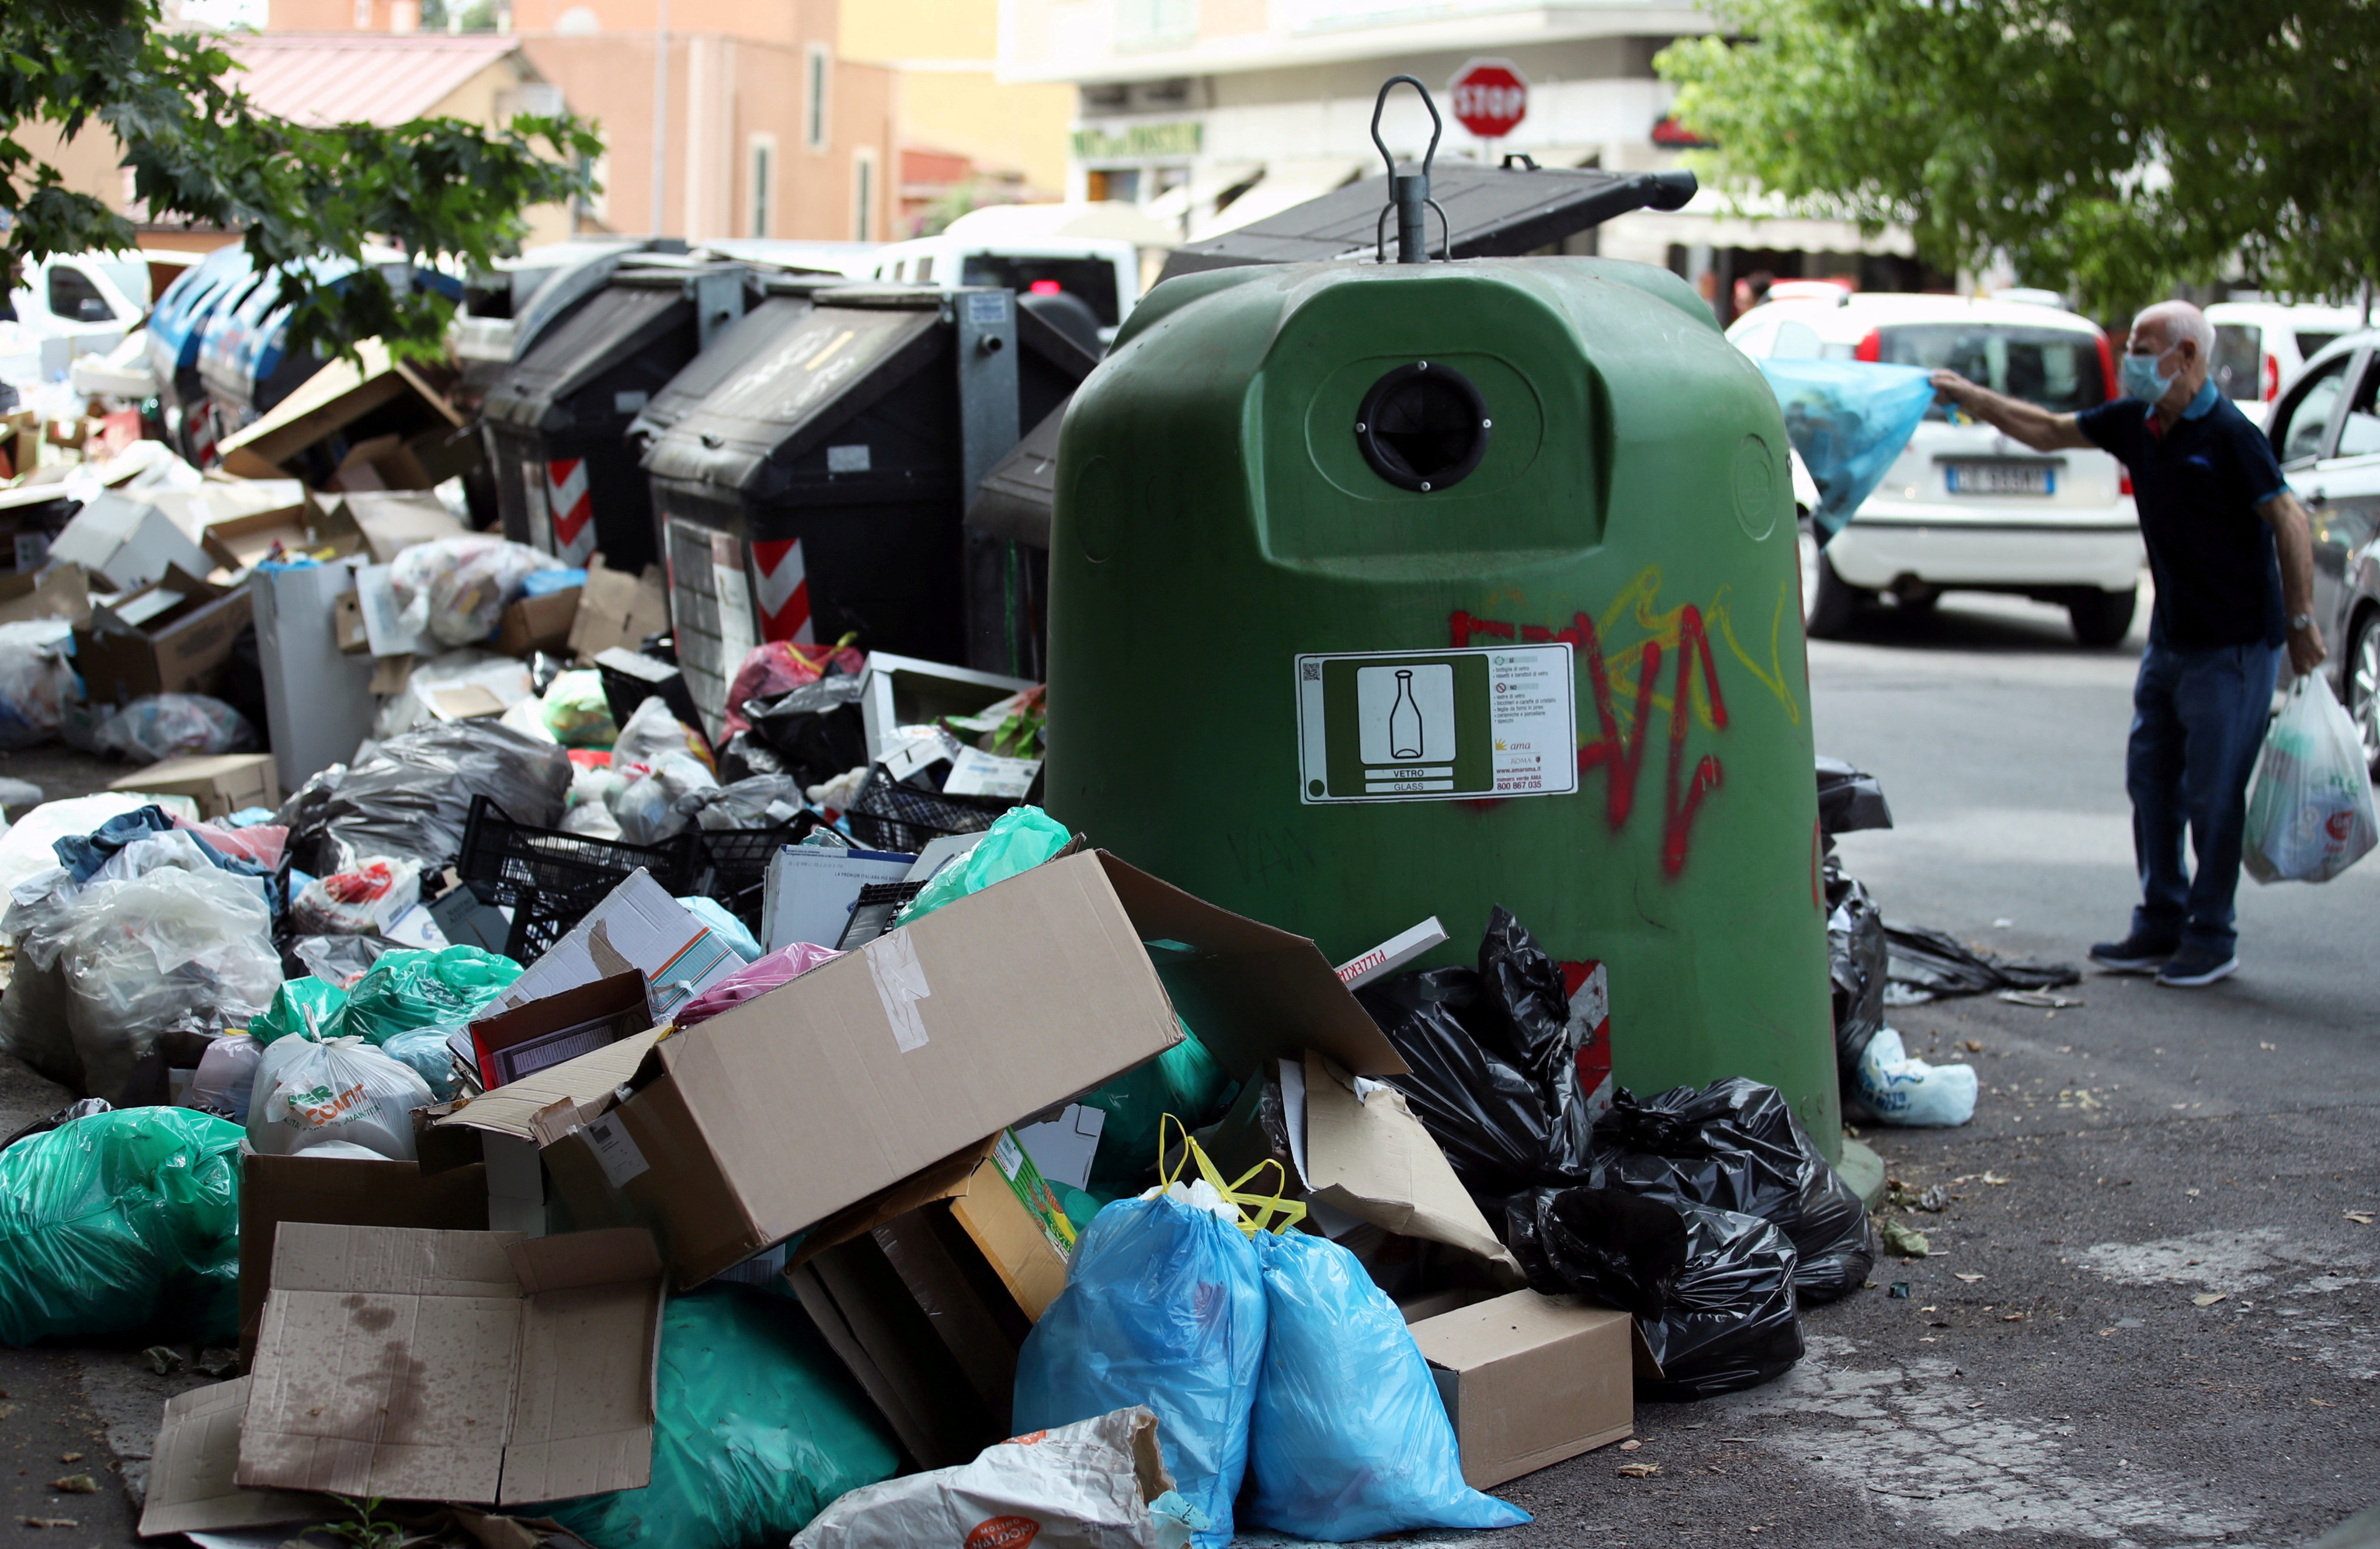 Rubbish mounts up around garbage containers as Rome authorities struggle to provide a regular disposal service